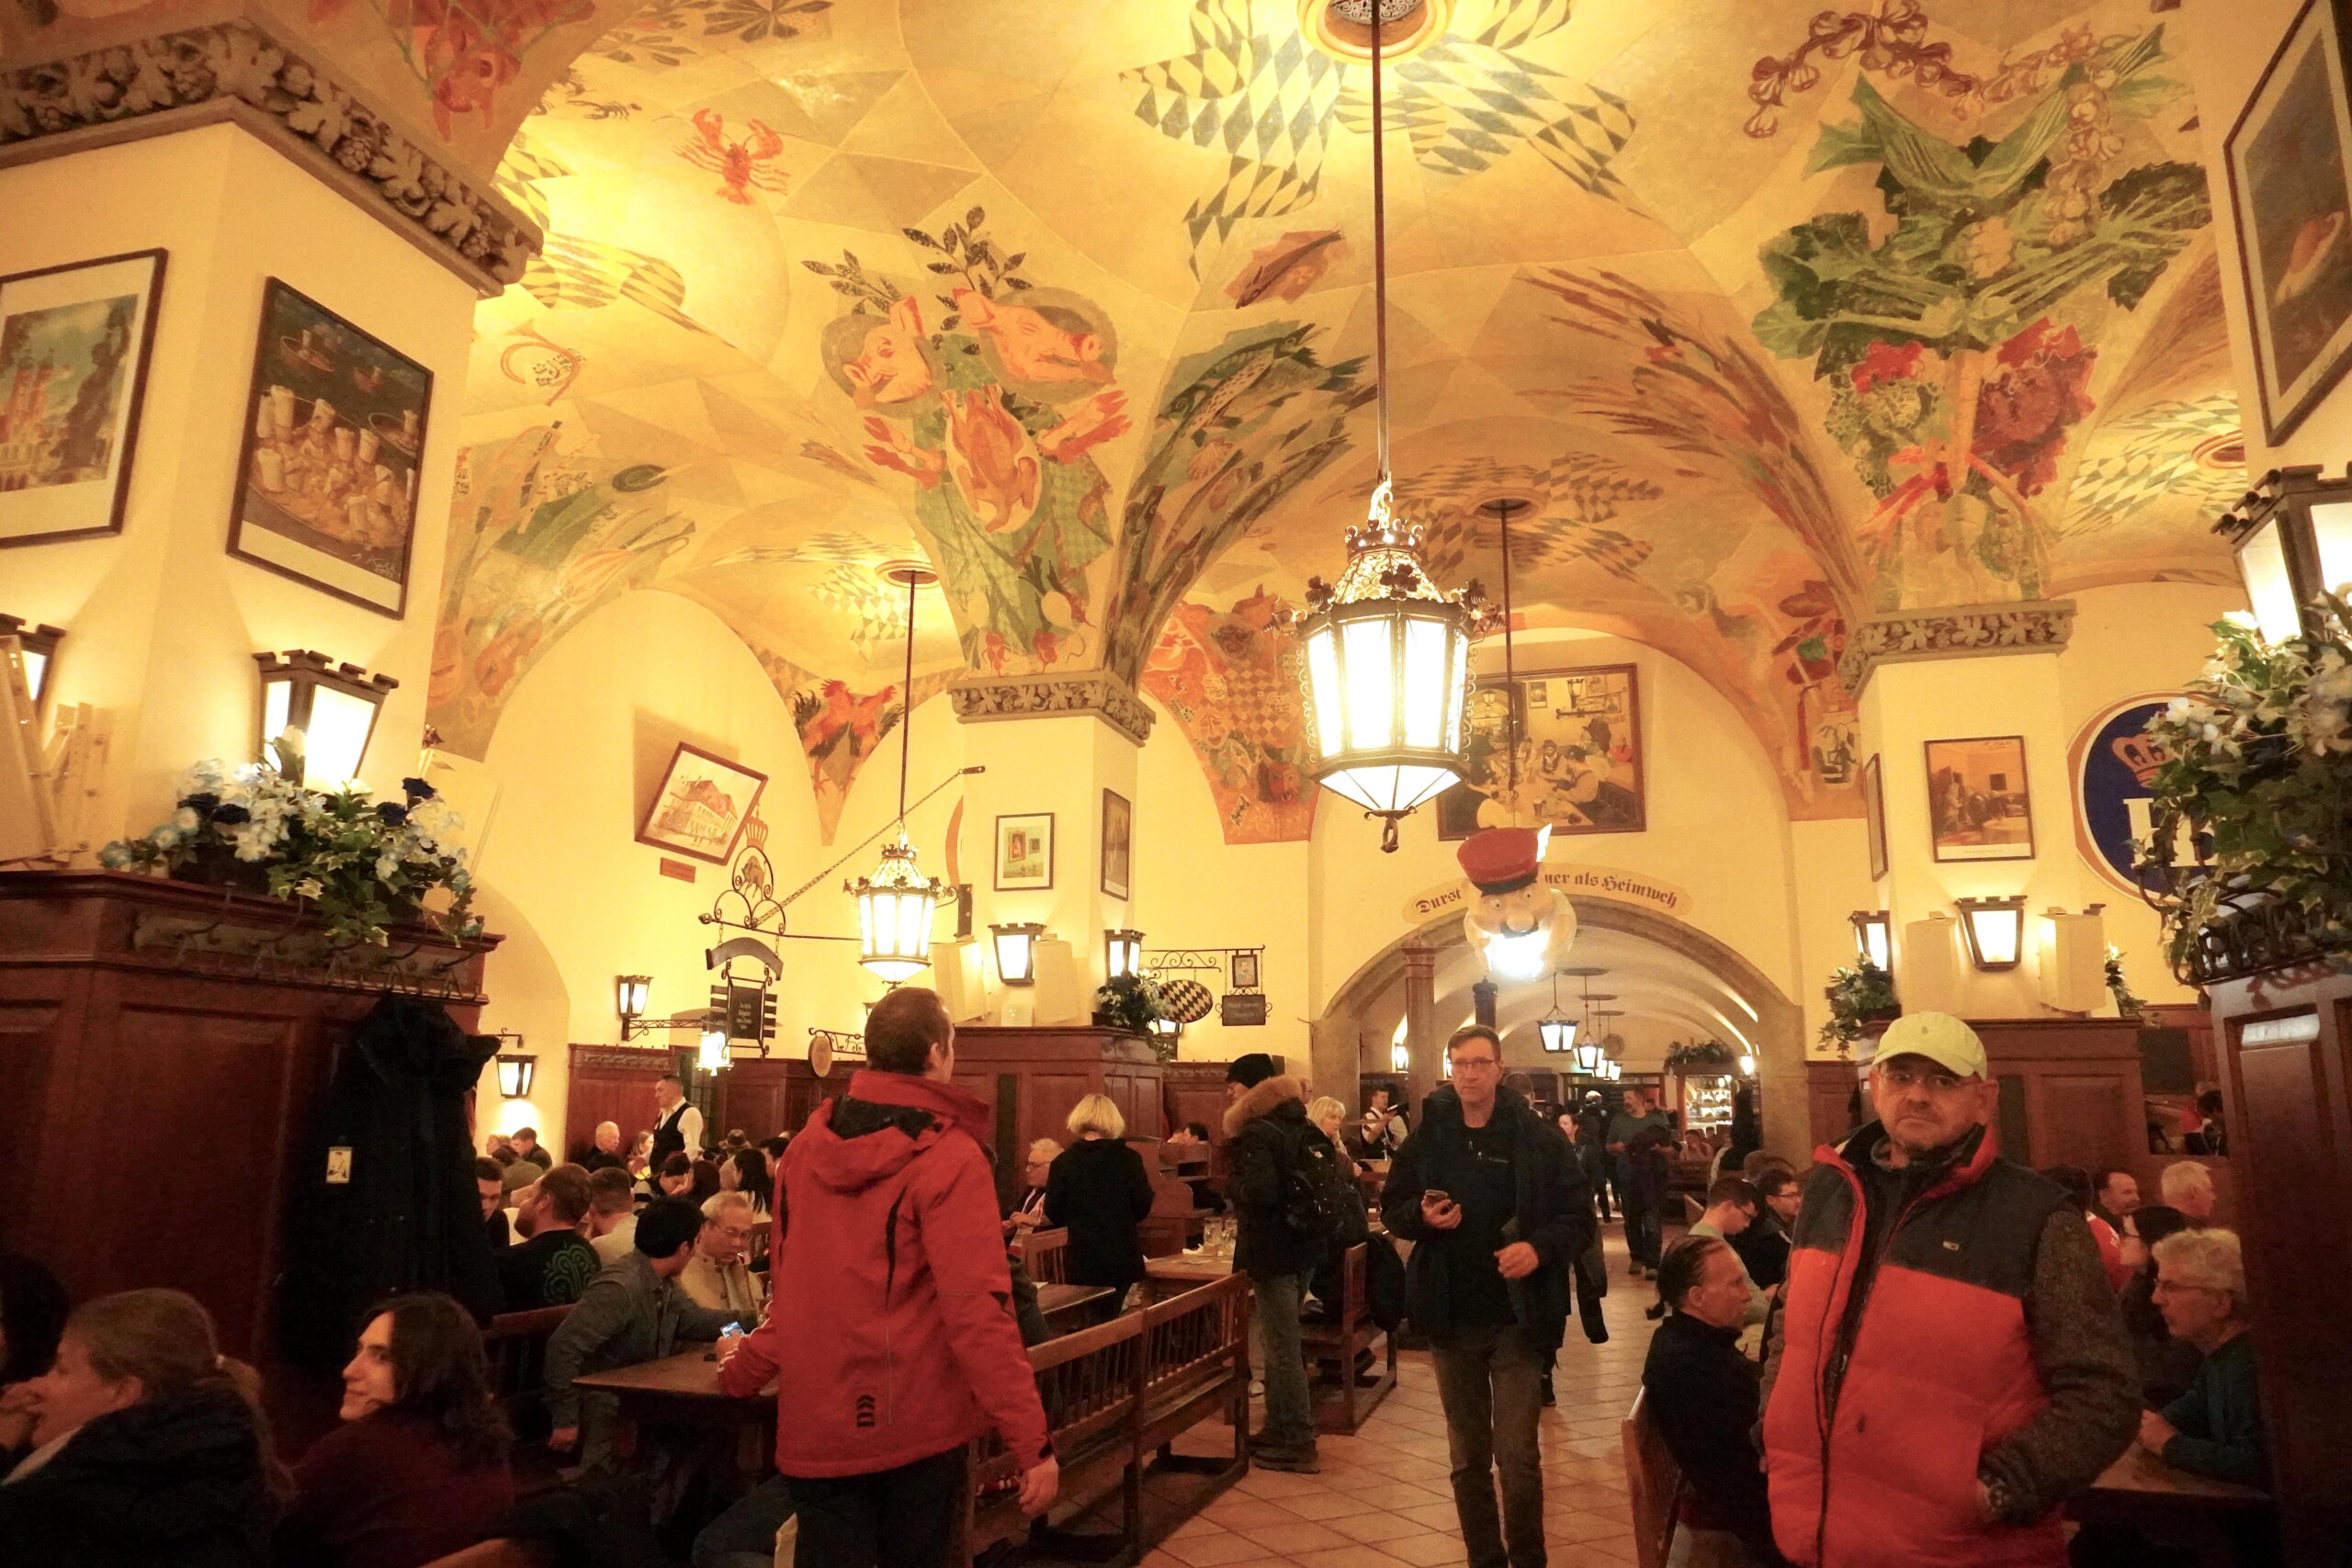 The beautiful ceiling of the Hofbrauhouse in Munich